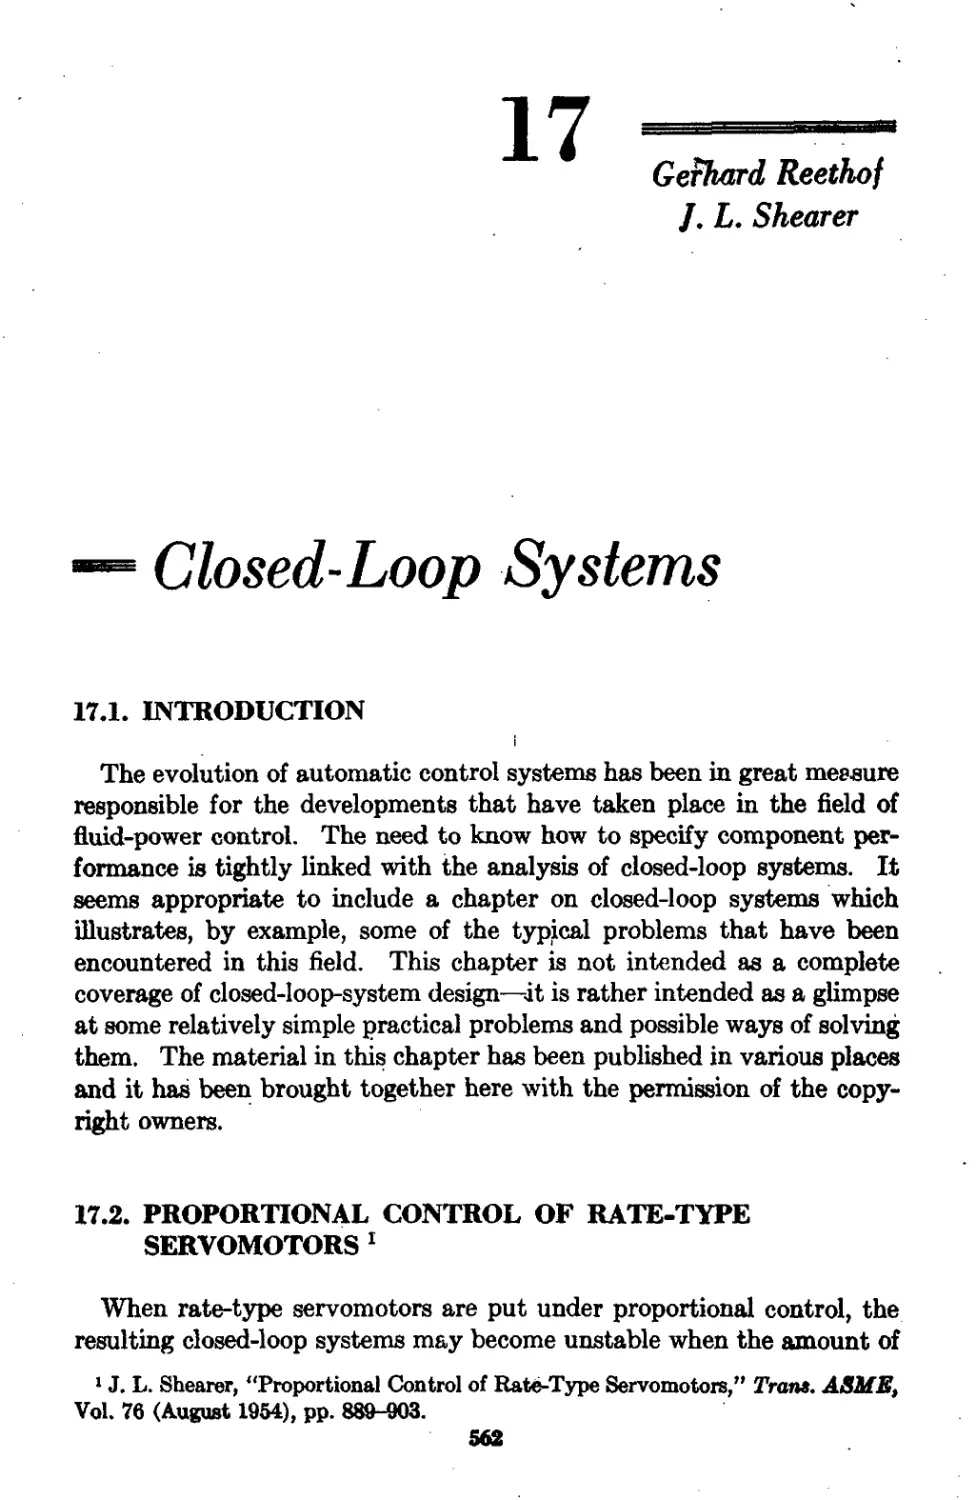 Chapter 17 Closed-Loop Systems: Gerhard Reethof and J. L. Shearer
17.2 Proportional Control of Rate-Type Servomotors